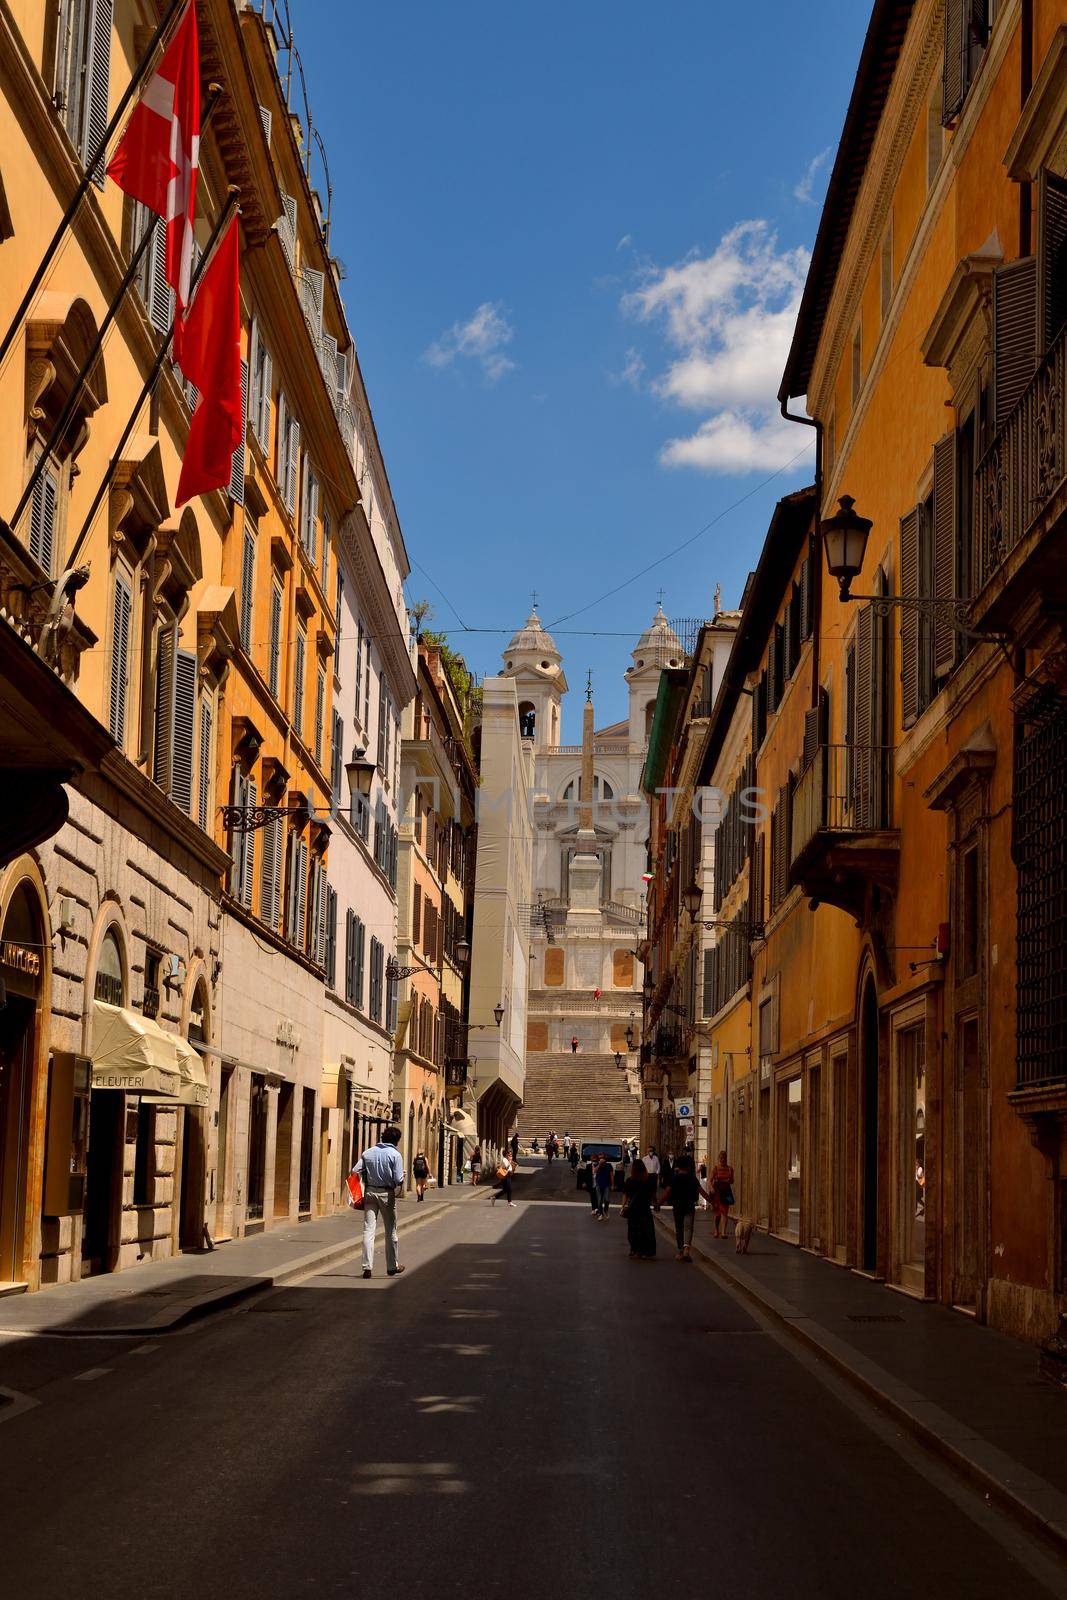 May 25th 2020, Rome, Italy: View of the Via dei Condotti and Piazza di Spagna without tourists due to the phase 2 of lockdown